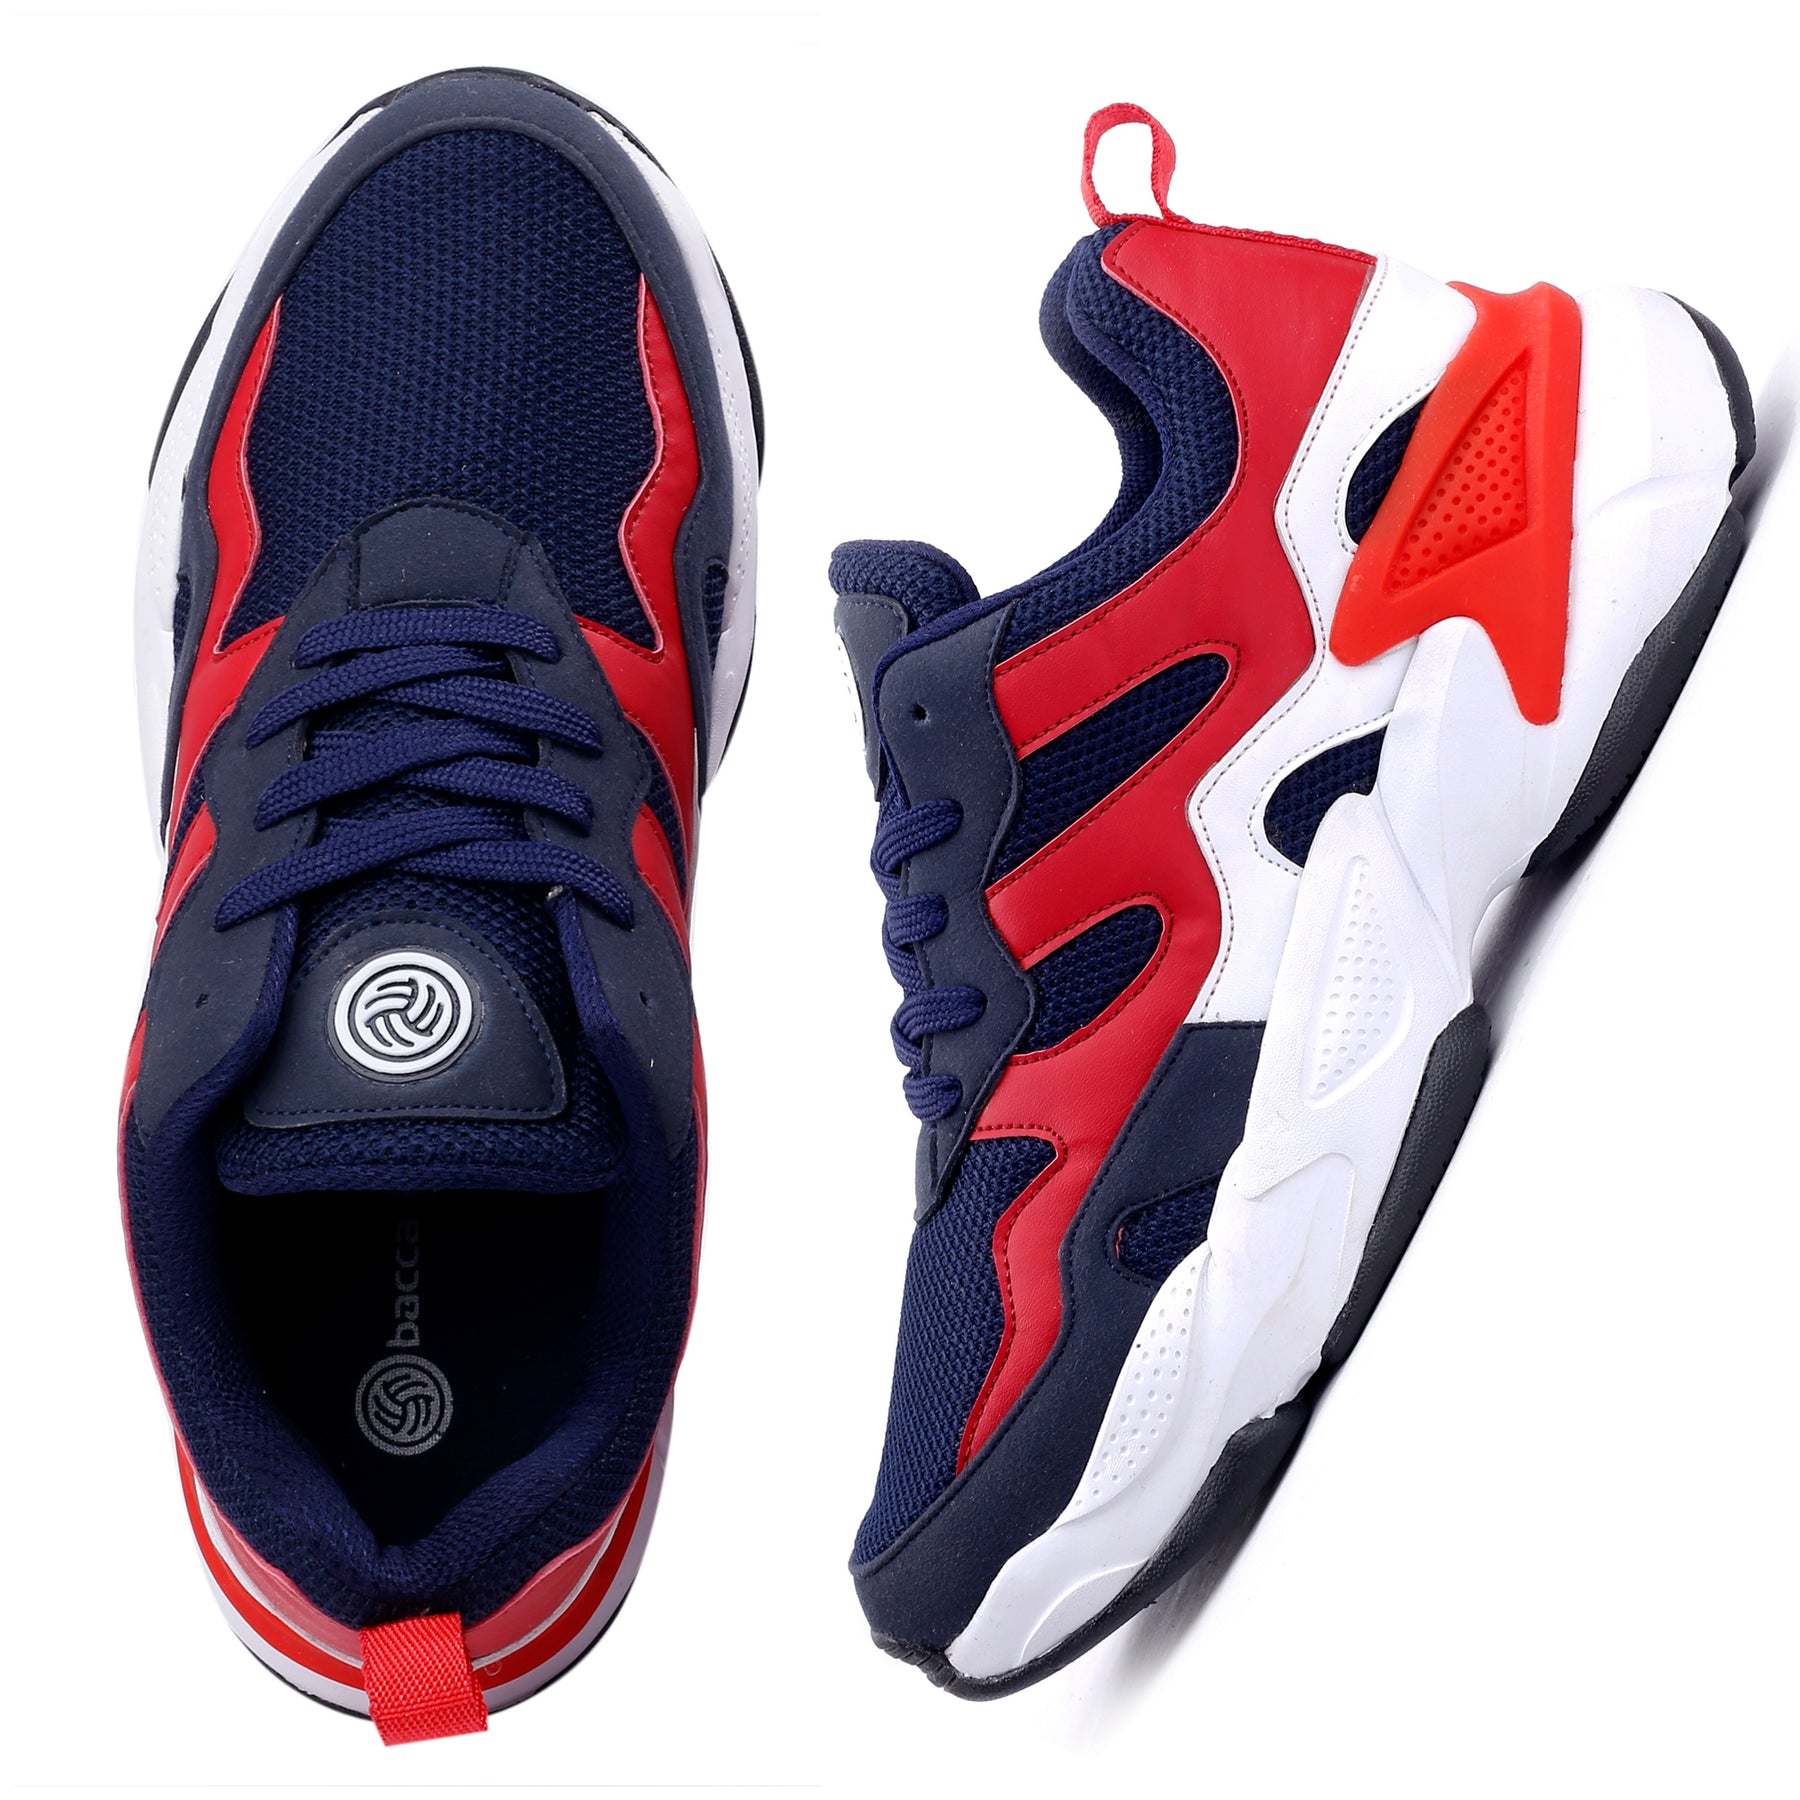 running shoes, best running shoes, sports shoes, red running shoes, gym shoes